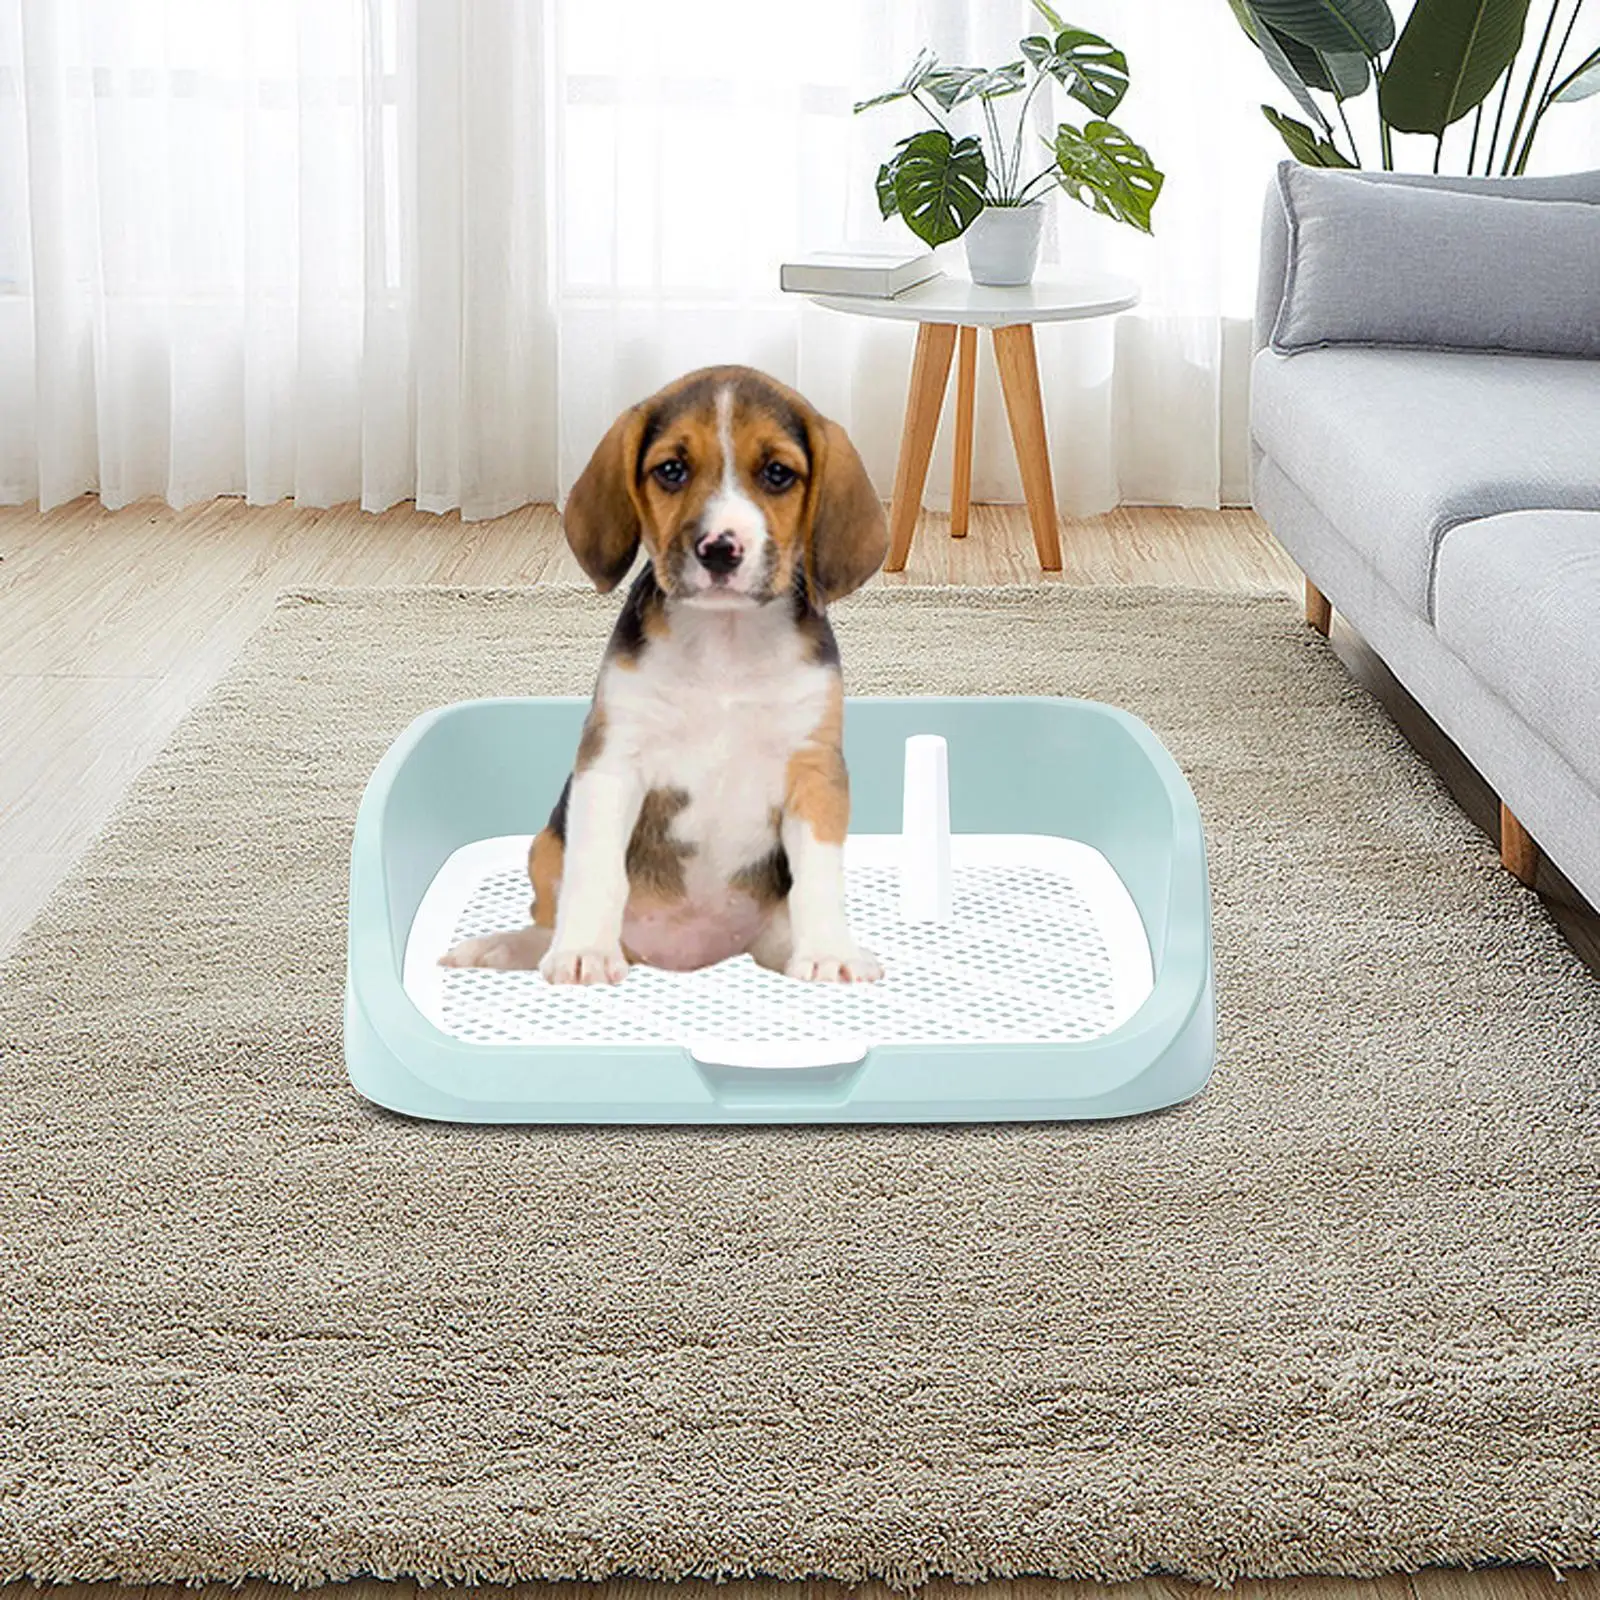 Portable dog toilet, puppy tray to keep paws and floors clean with column dog